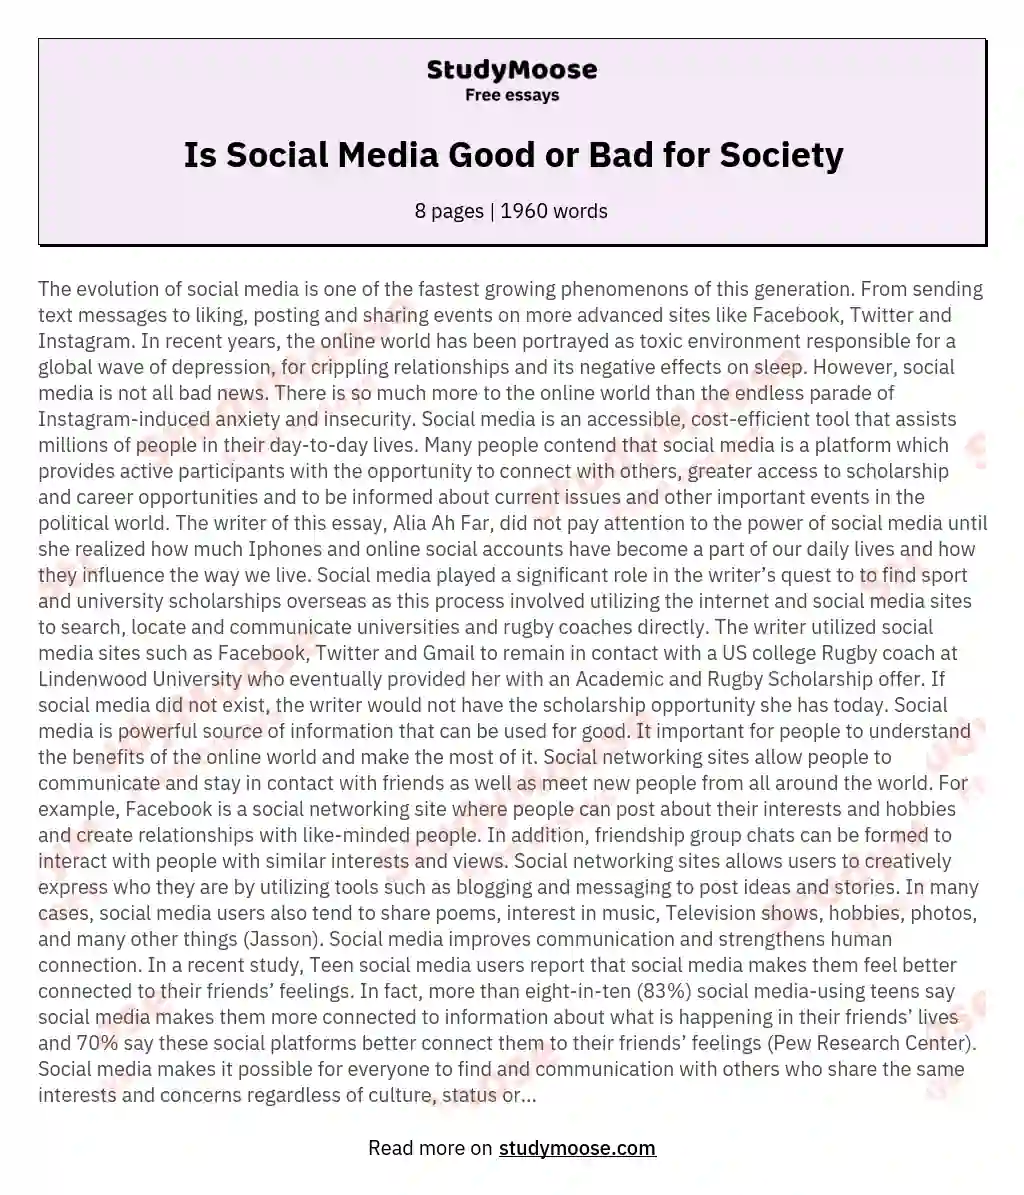 Is Social Media Good or Bad for Society